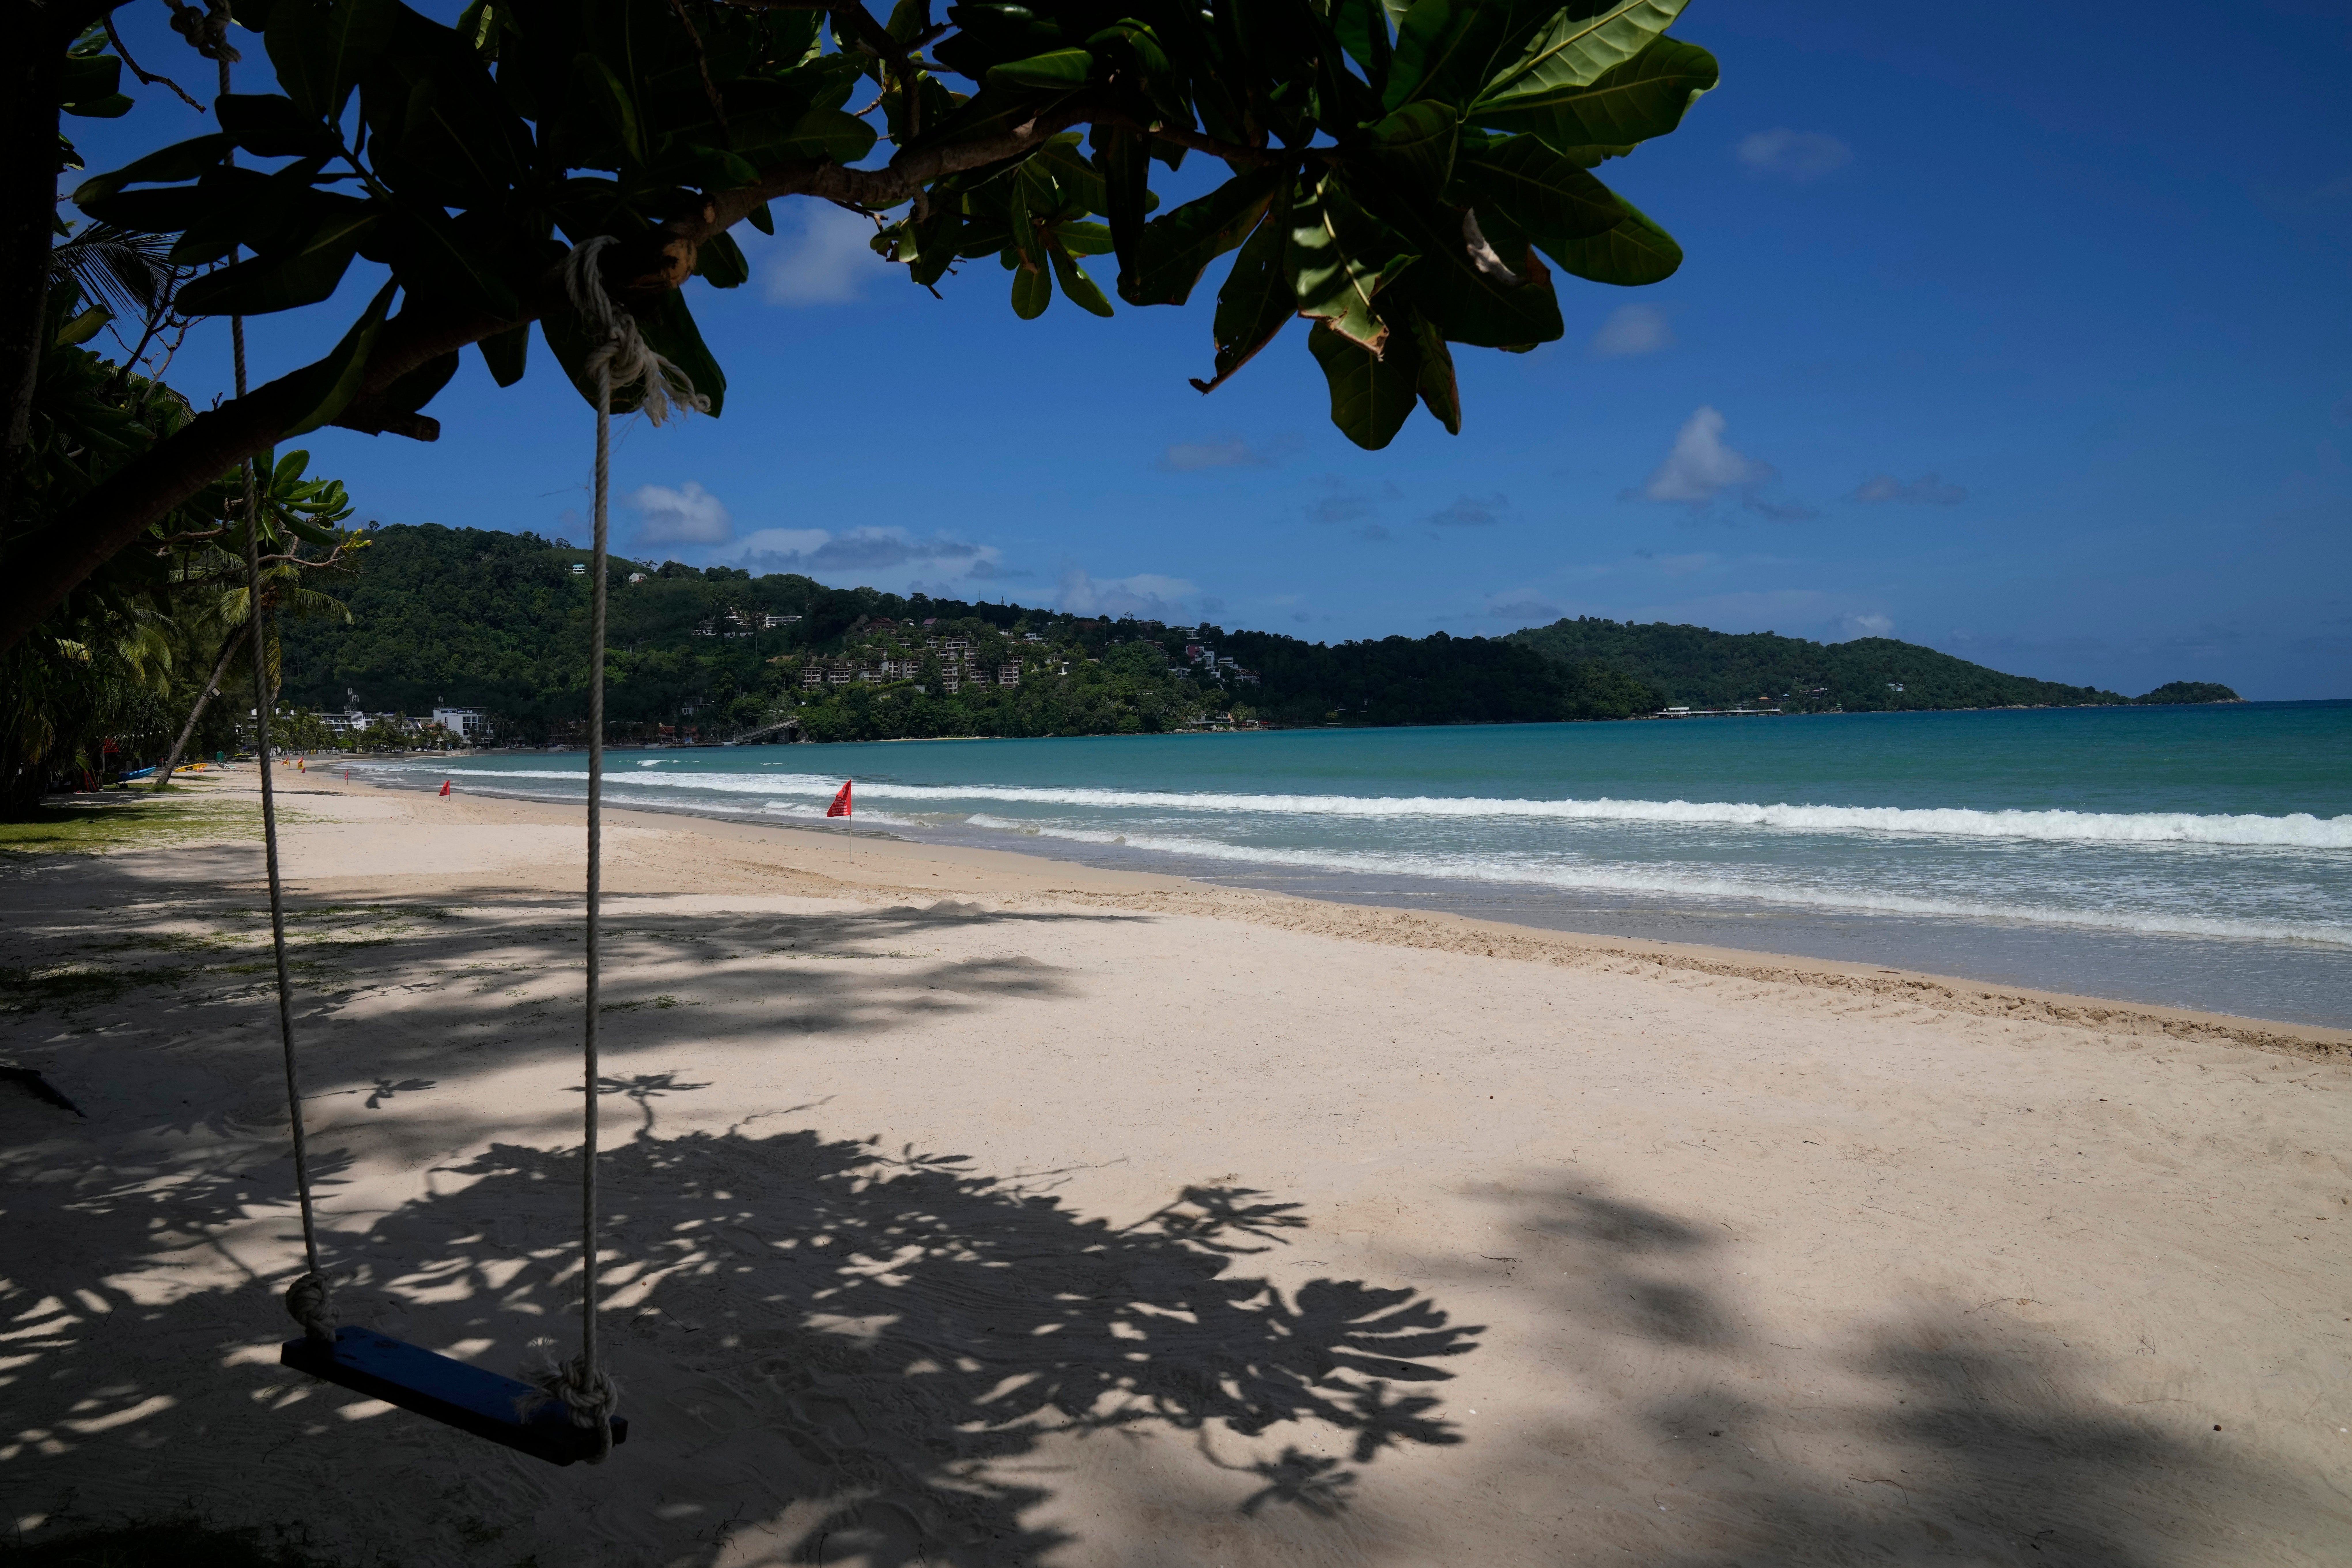 Phuket’s beaches have been deserted since the pandemic decimated Thailand’s travel sector